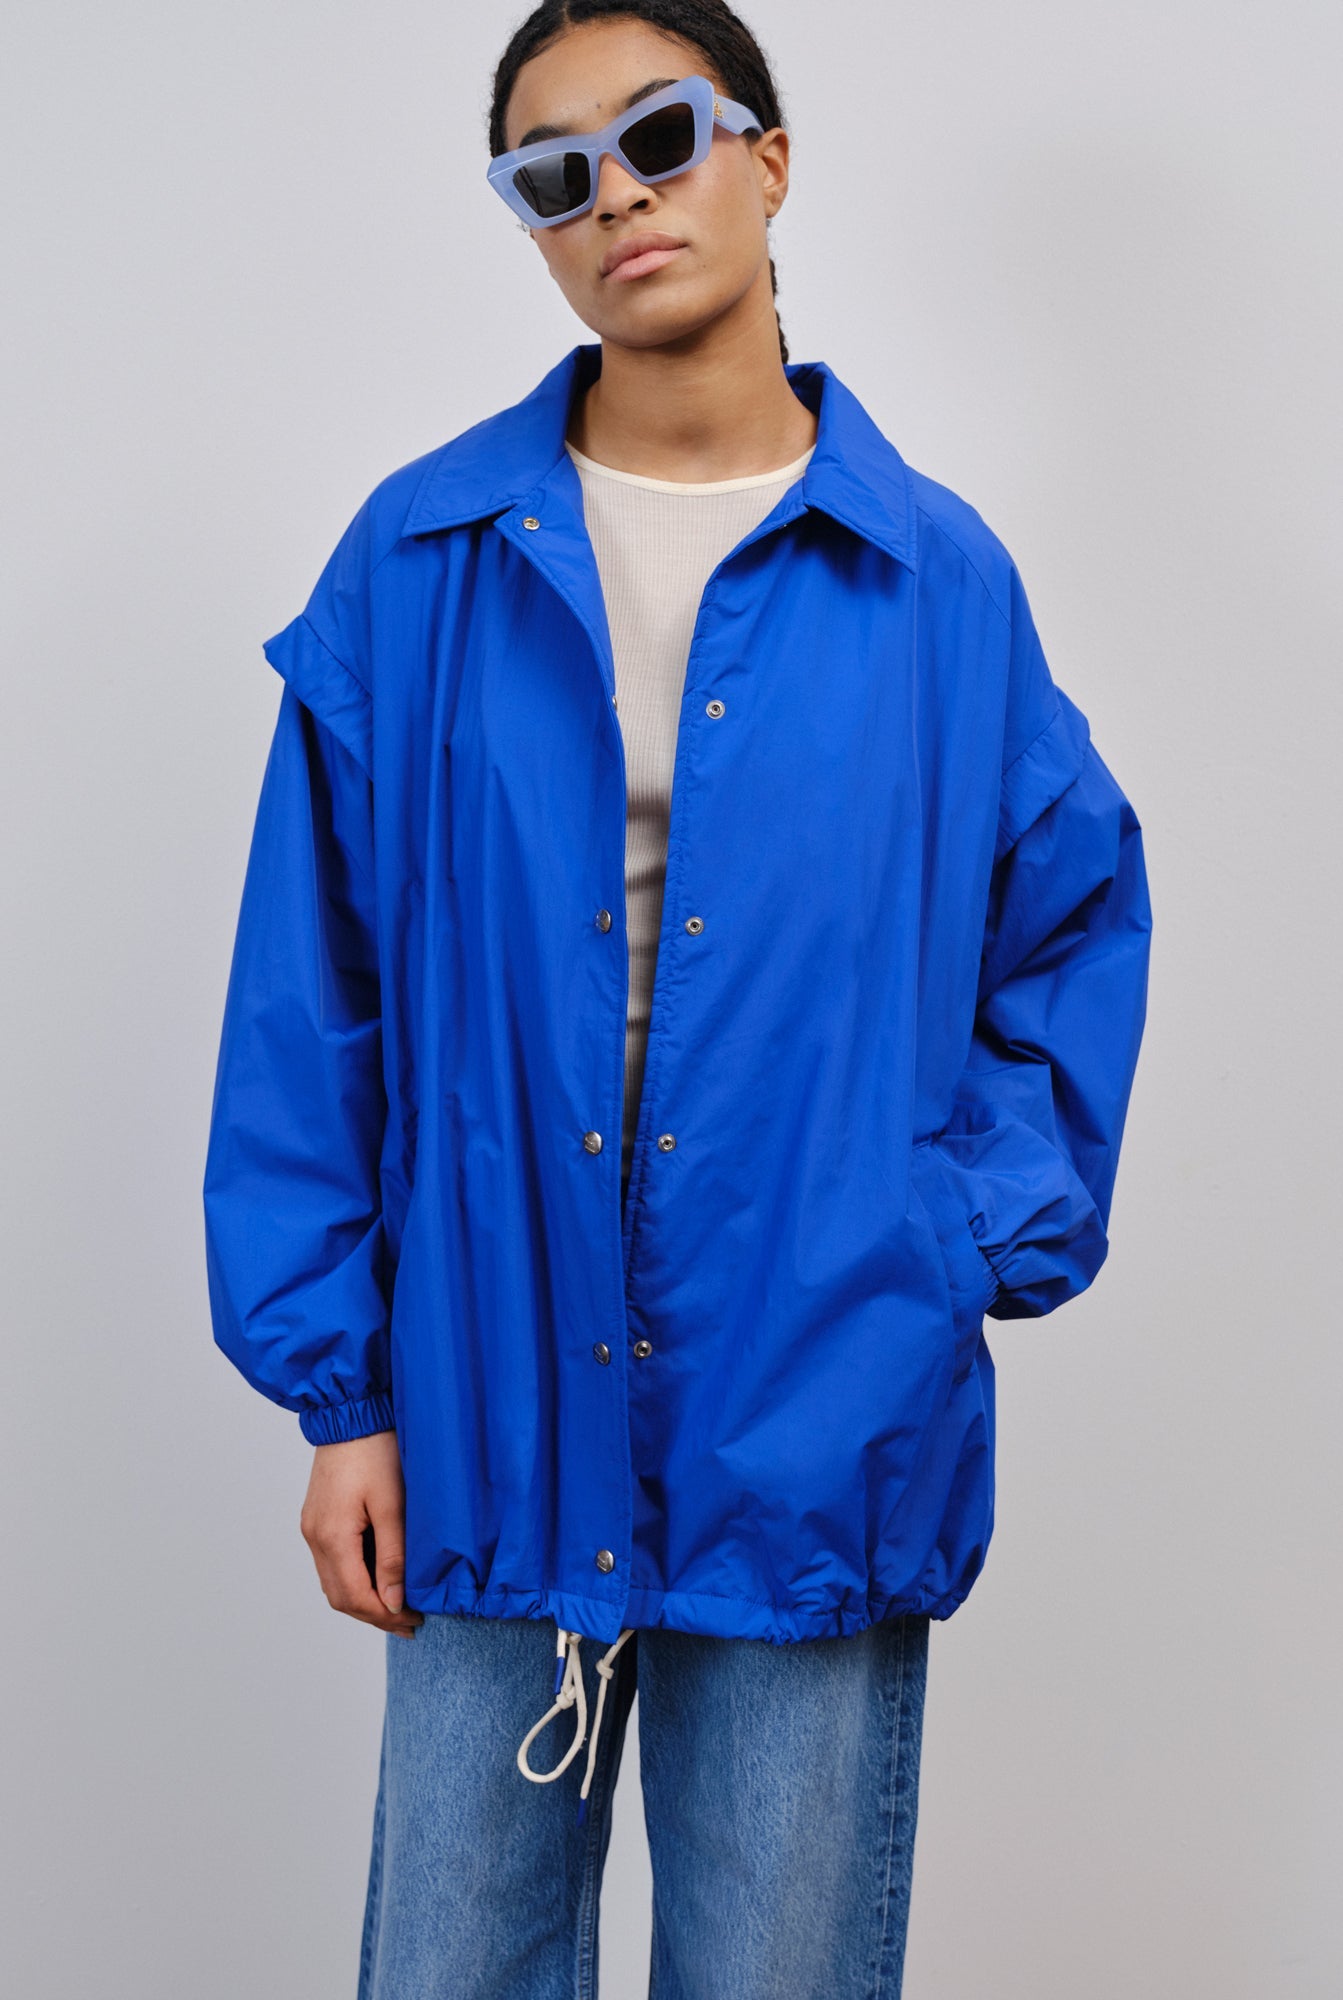 LUCCA COACH JACKET